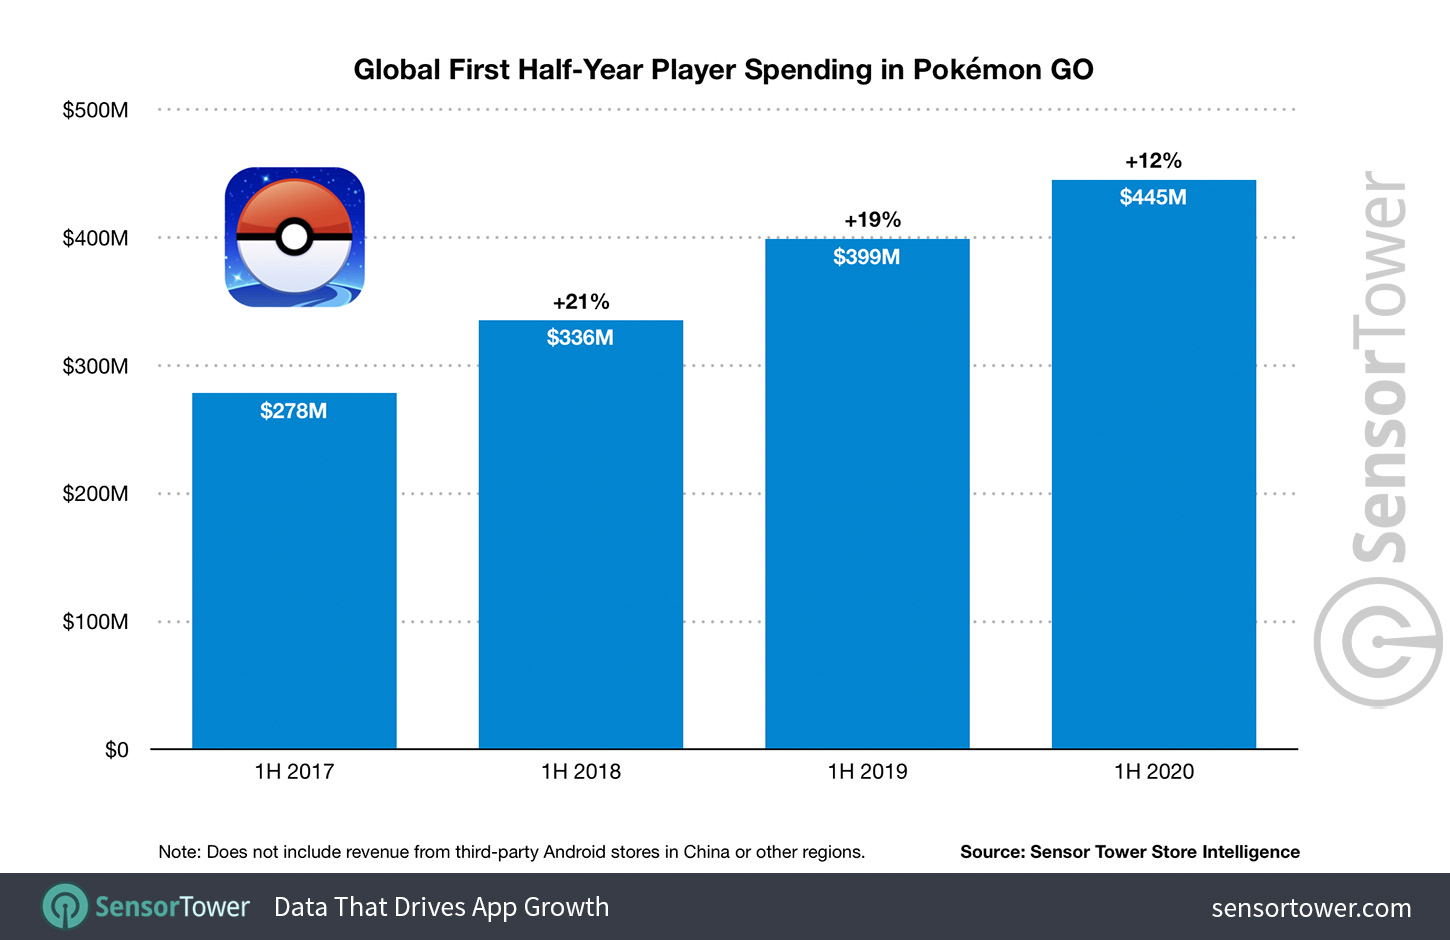 Global First Half-Year Player Spending in Pokémon GO